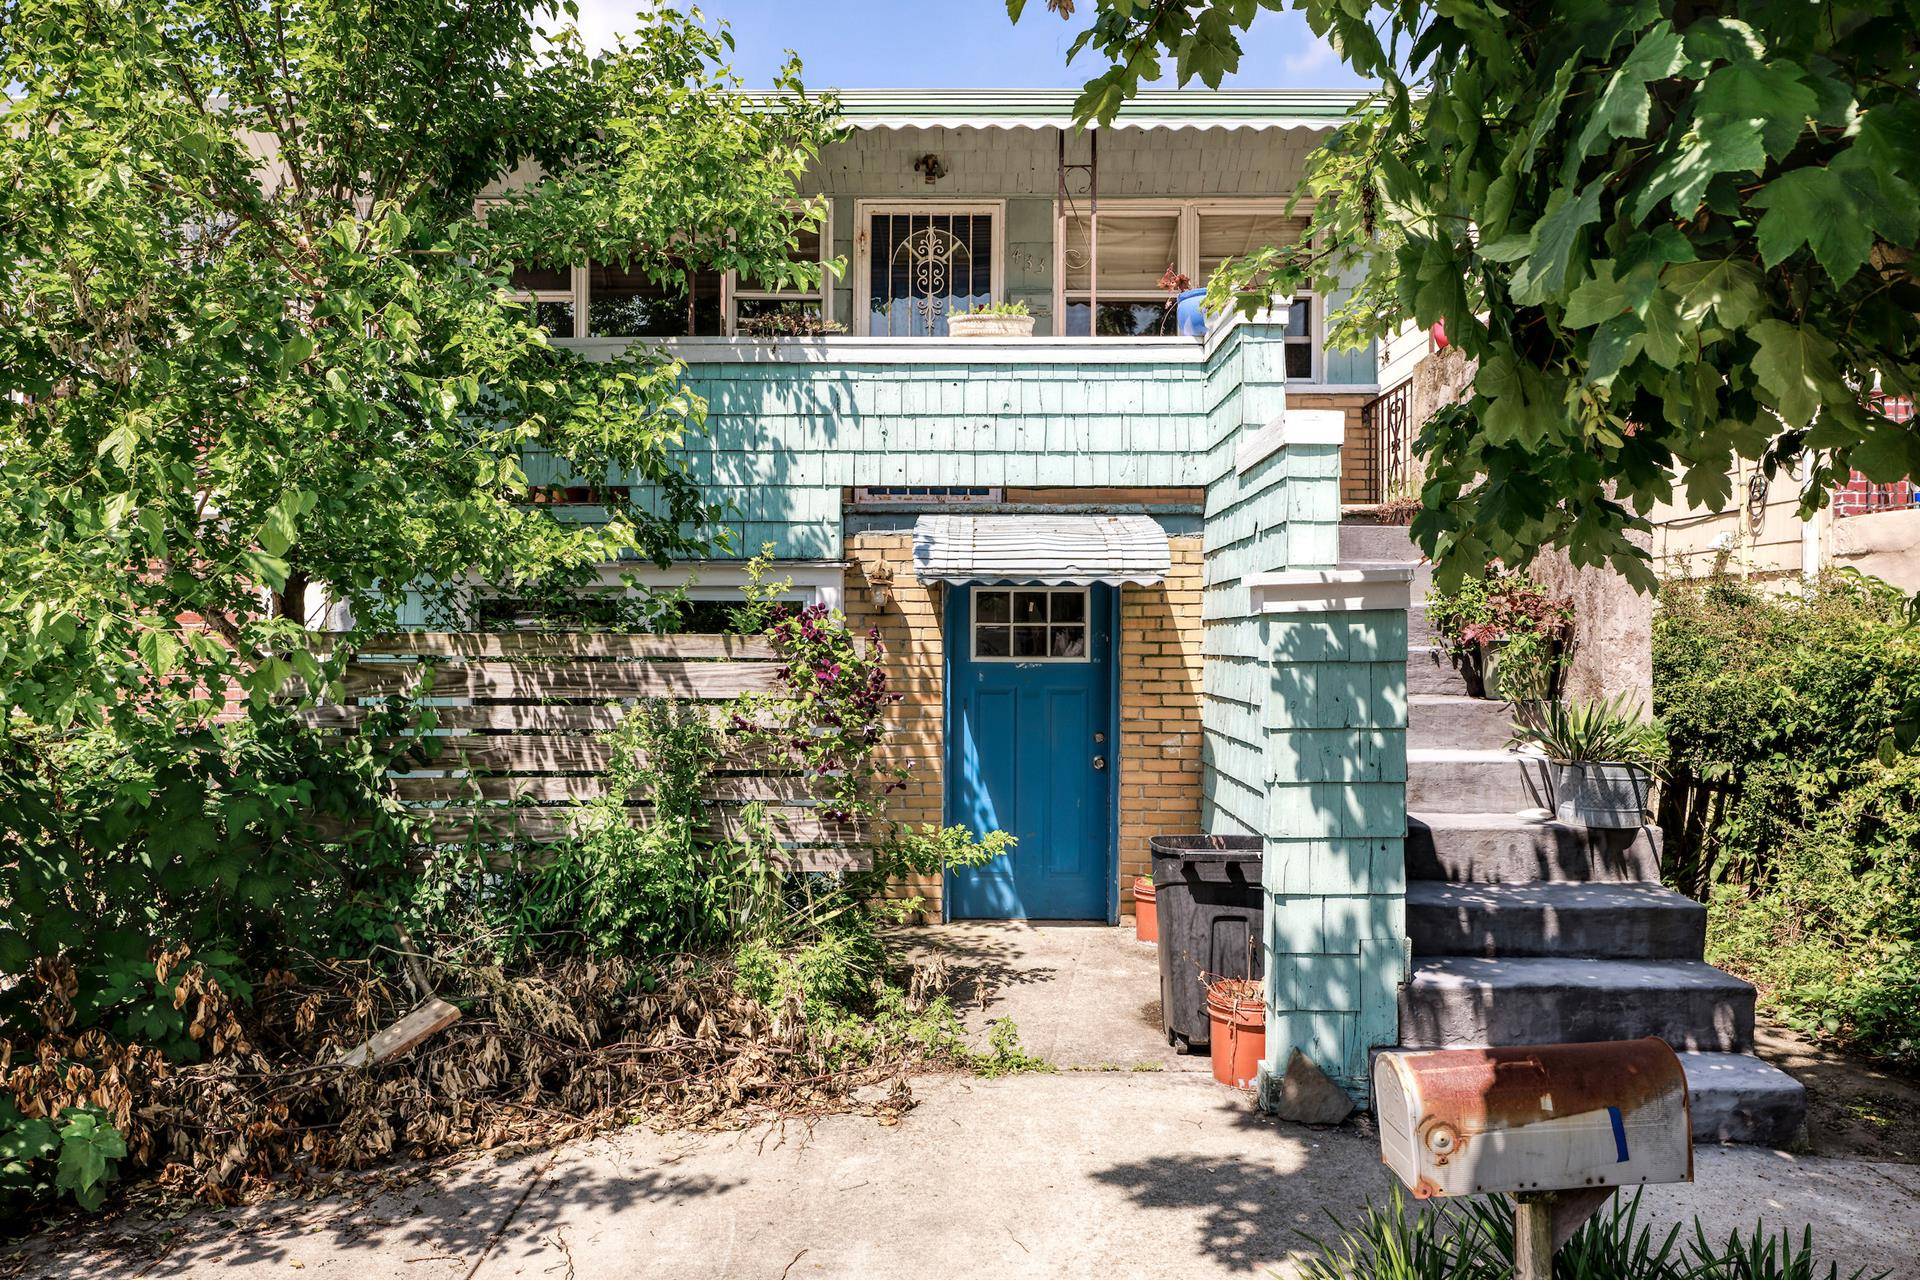 Get out of the city and come home to this airy and sunny Rockaway bungalow oasis, located a few blocks from the beach and just off Beach Channel Drive !